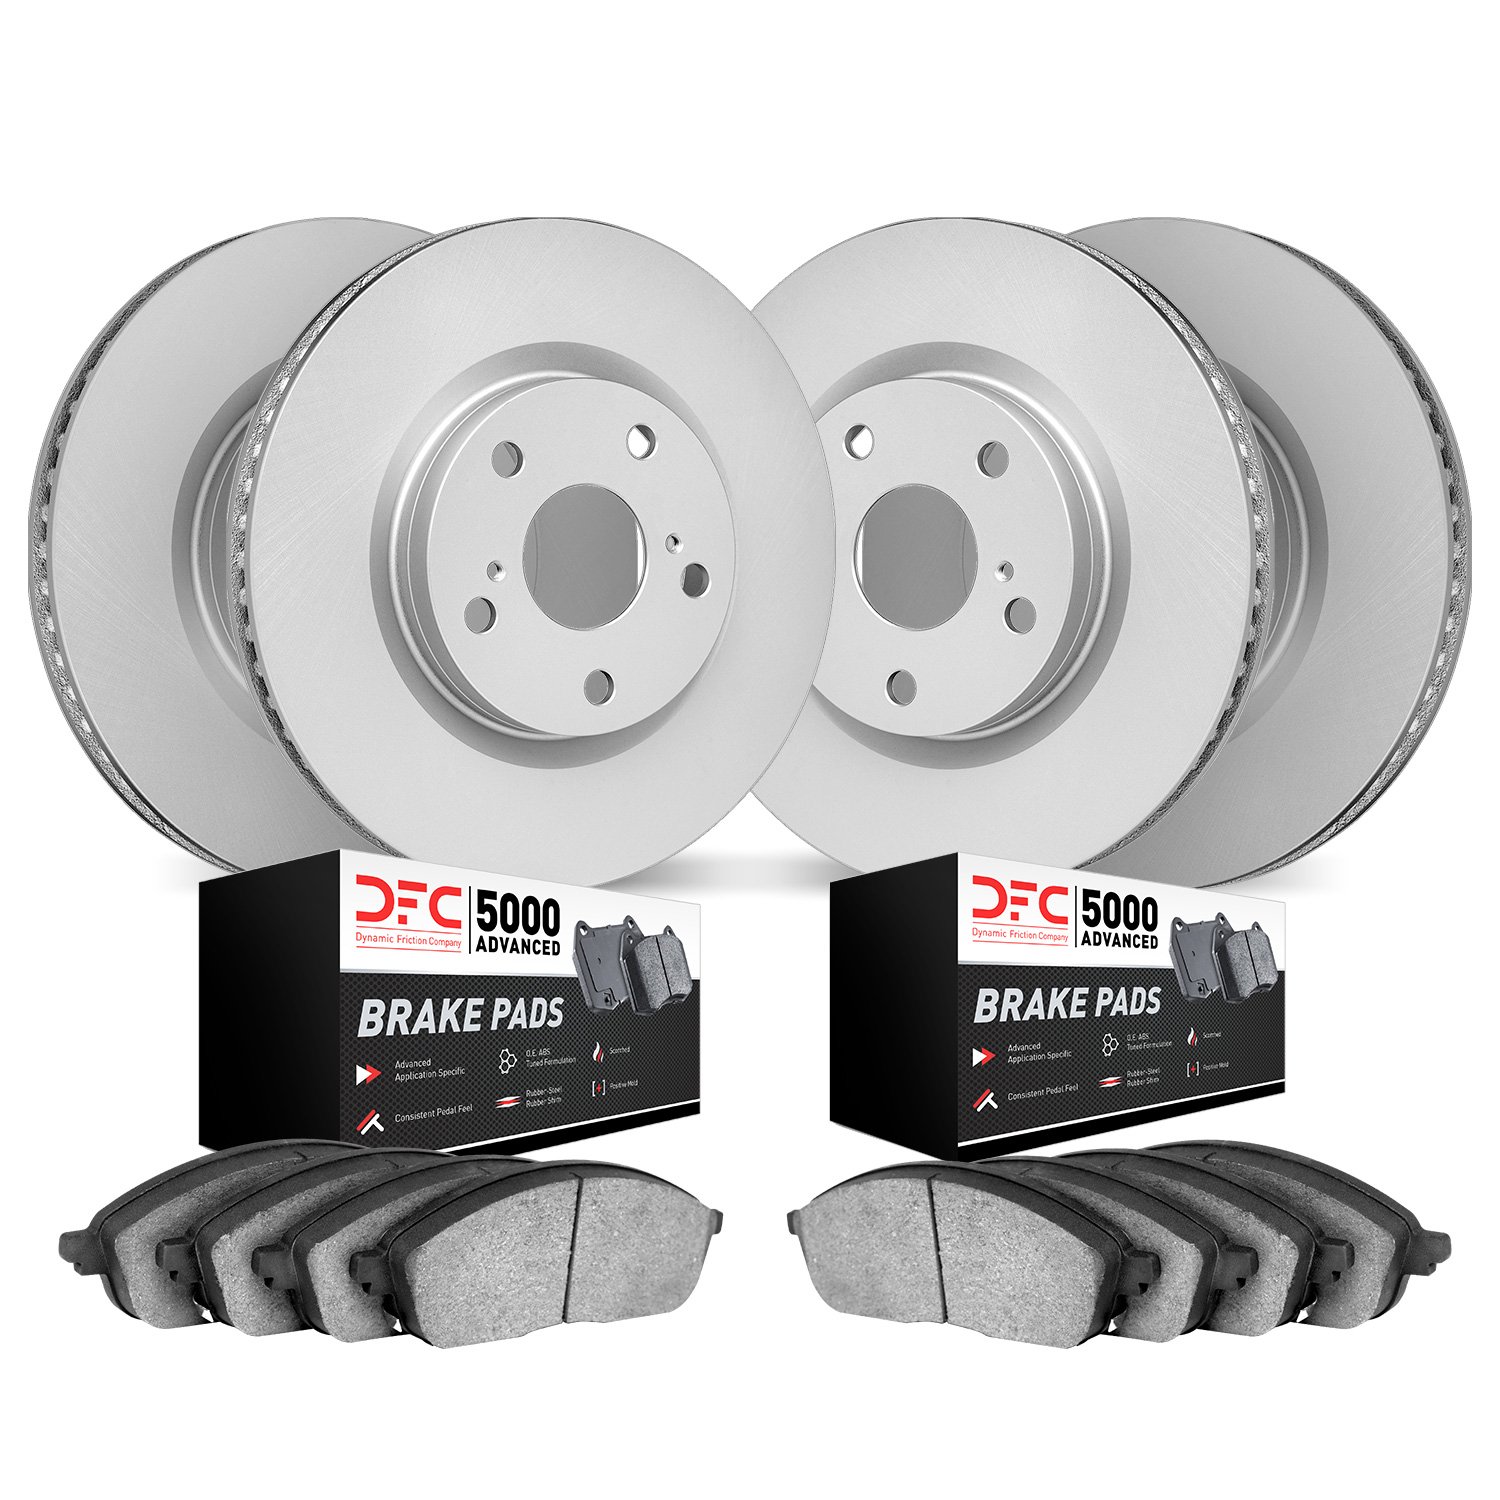 4504-65009 Geospec Brake Rotors w/5000 Advanced Brake Pads Kit, 2006-2007 GM, Position: Front and Rear